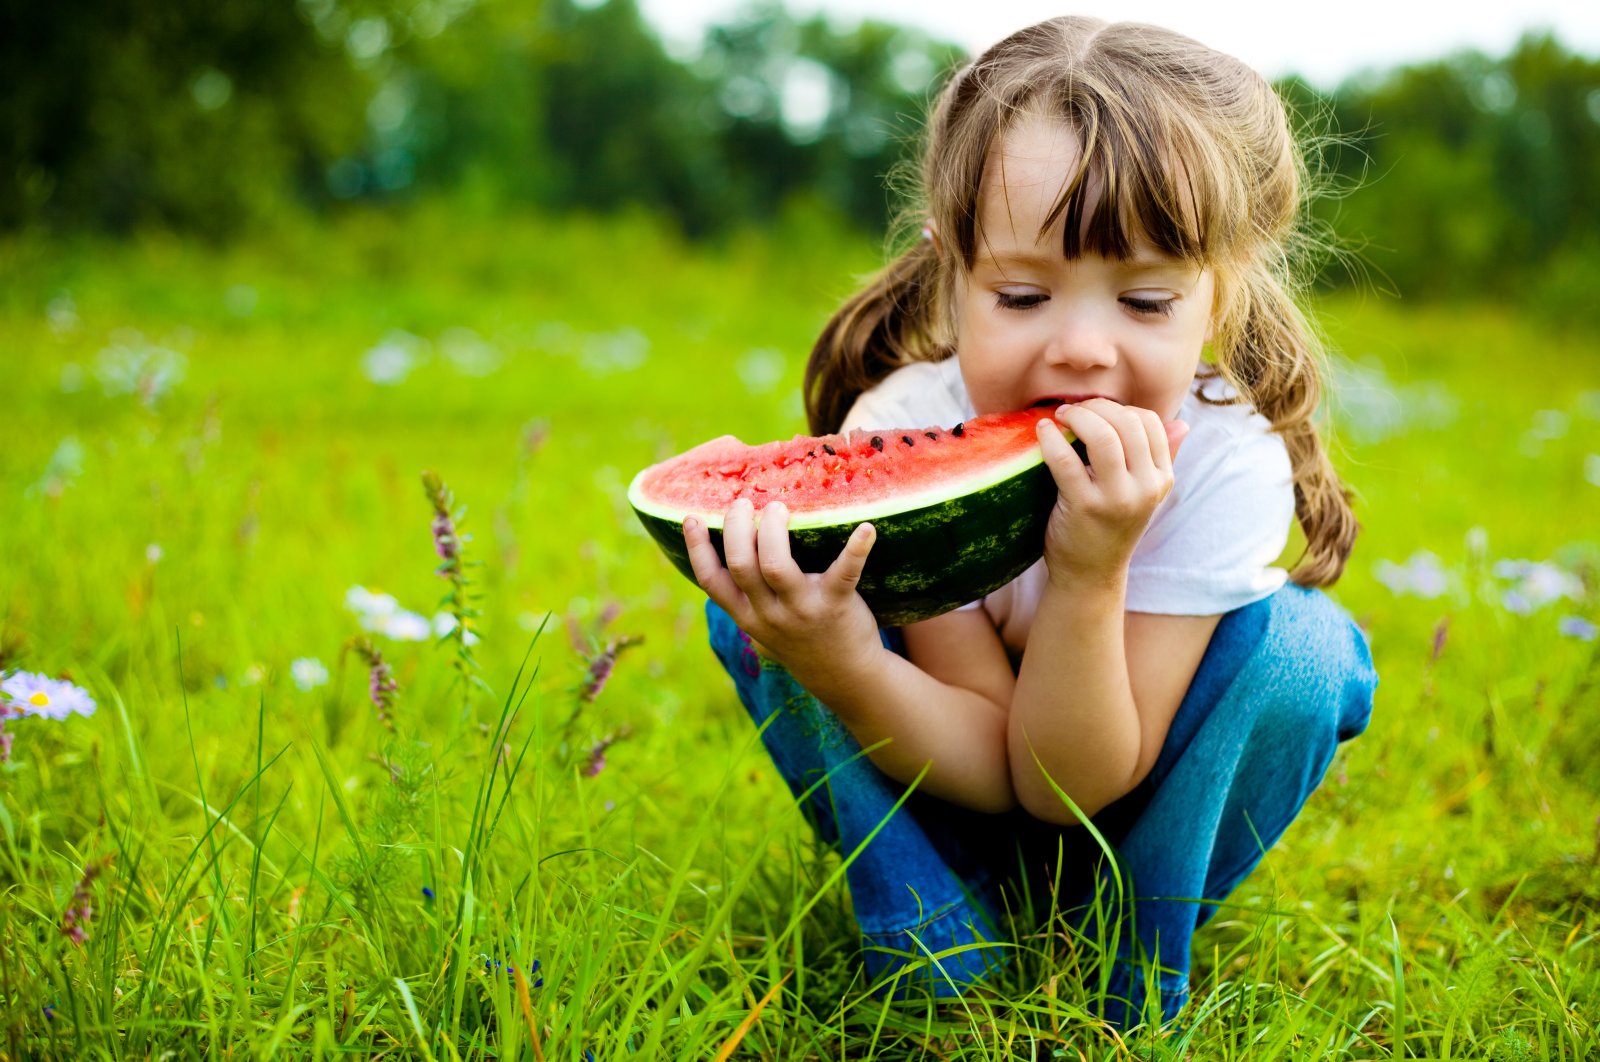 A child's nutrition has as much or even more influence on mental well-being than seeing fighting parents or even violence at home, according to a new study. (Shutterstock Photo) 